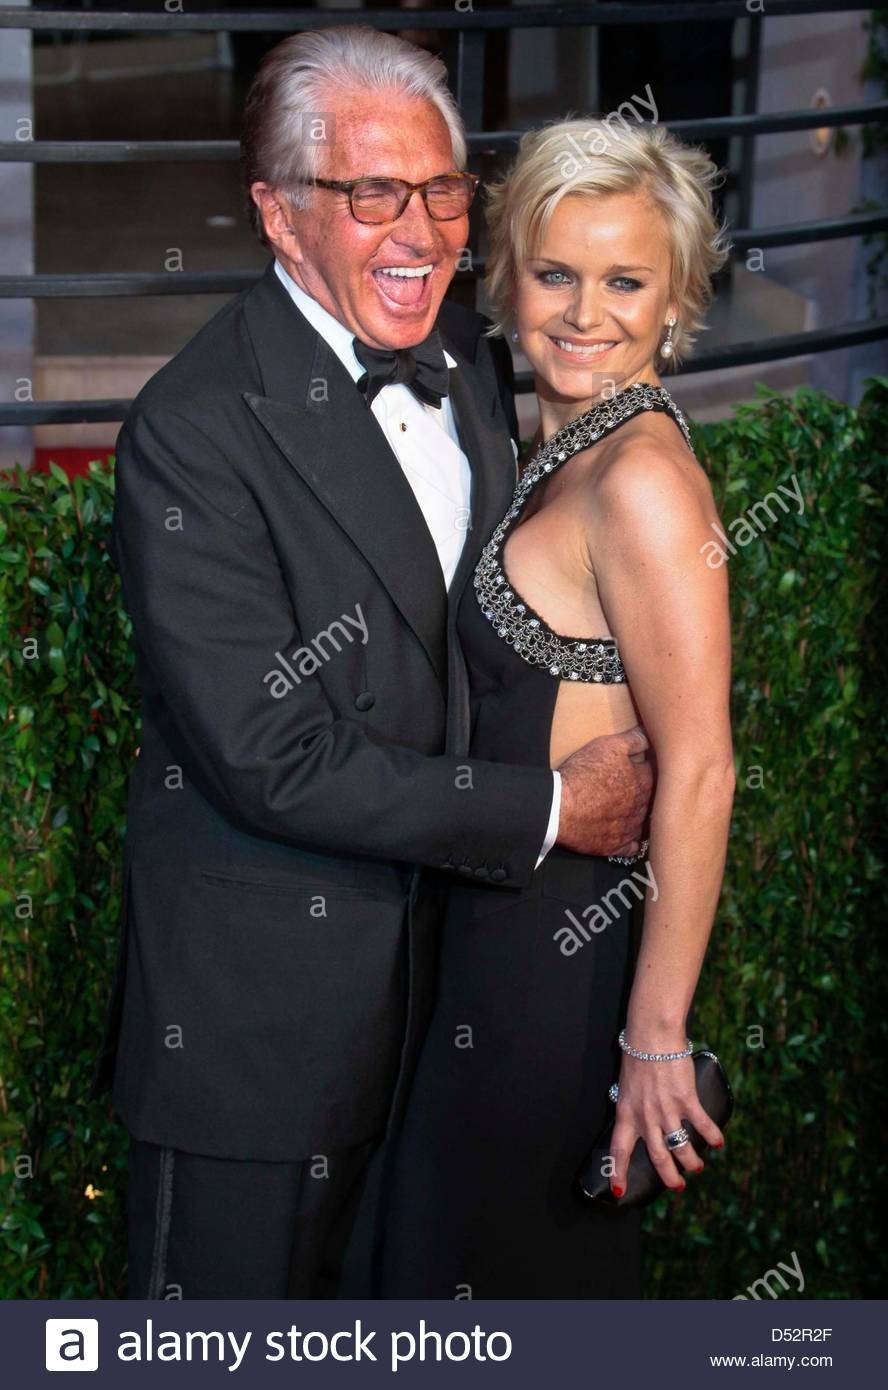 US actor George Hamilton and his partner Barbara Sturm arrive at the Vanity Fair Oscar Party at Sunset Tower in Los Angeles, USA, 07 March 2010. Photo: Hubert Boesl Stock Photo - Alamy Alamy US actor George Hamilton and his partner Barbara Sturm arrive at the Vanity Fair Oscar Party at Sunset Tower in Los Angeles,